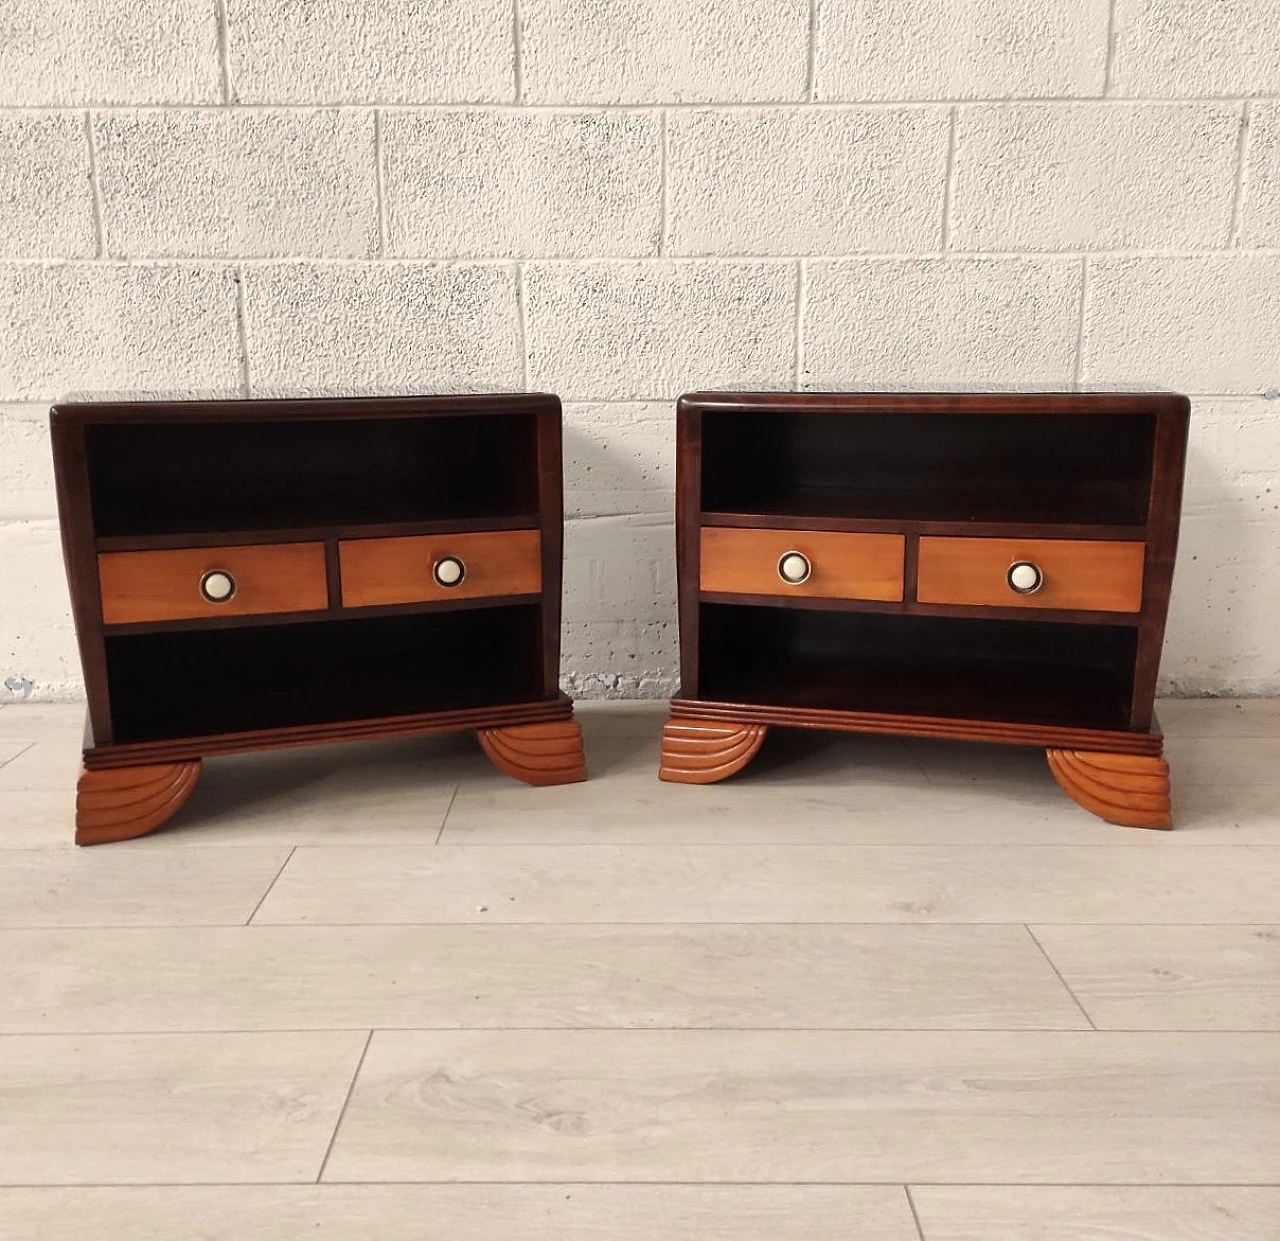 Pair of bedside tables in mahogany and cherry wood, 1930s 1